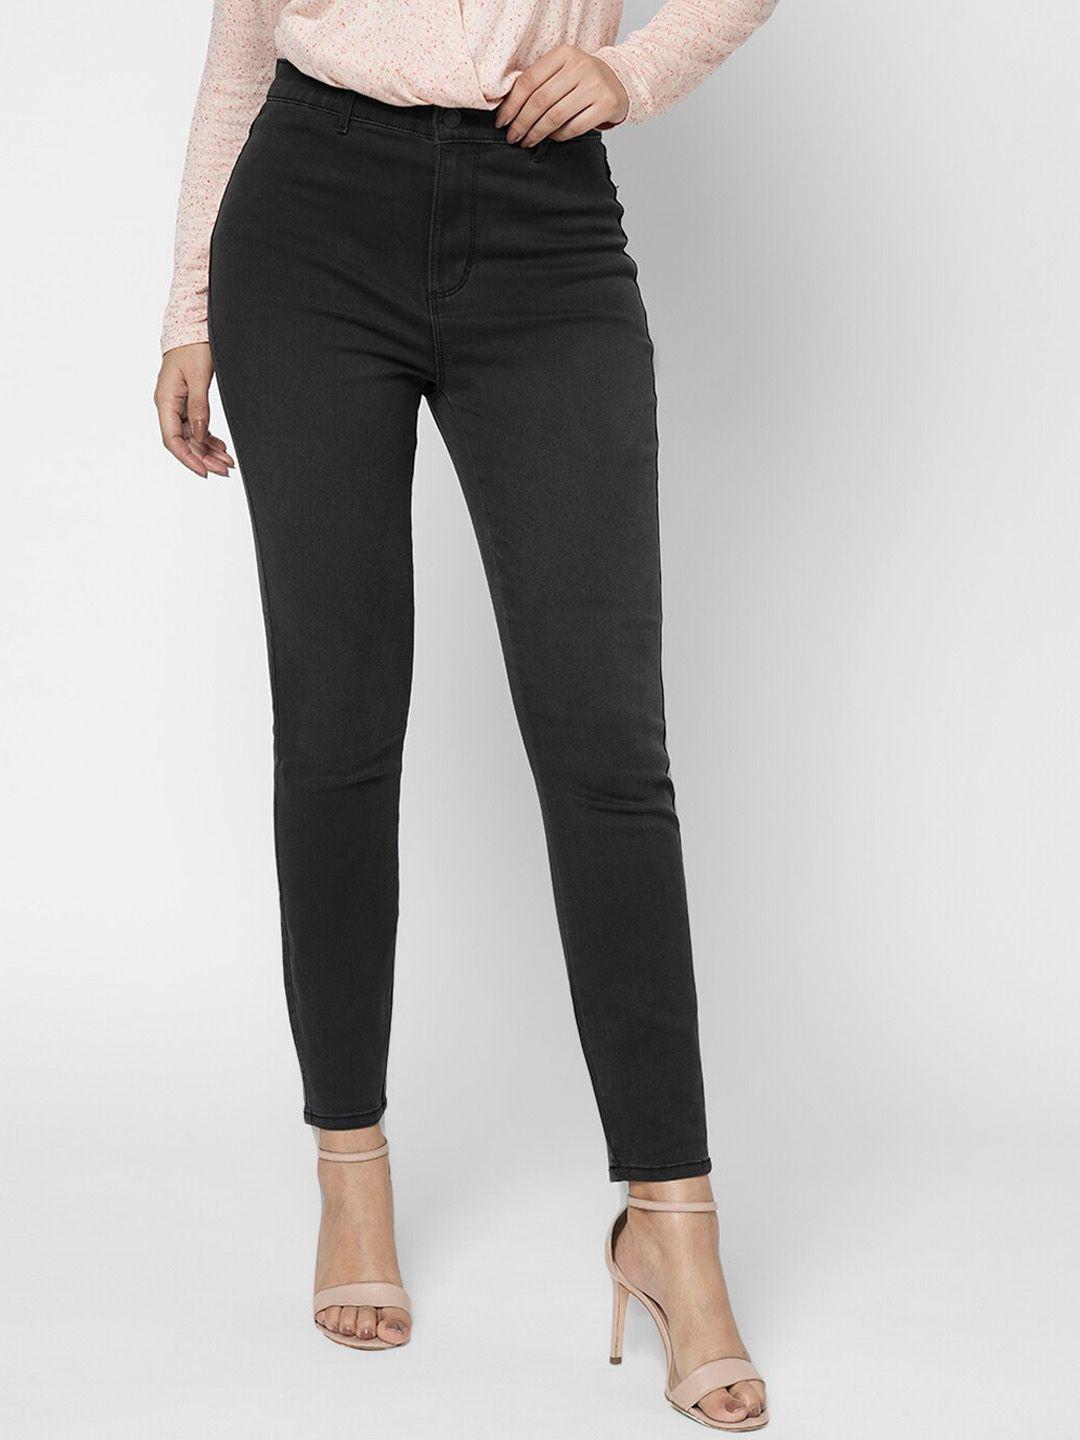 vero-moda-women-grey-skinny-fit-clean-look-high-rise-stretchable-jeans